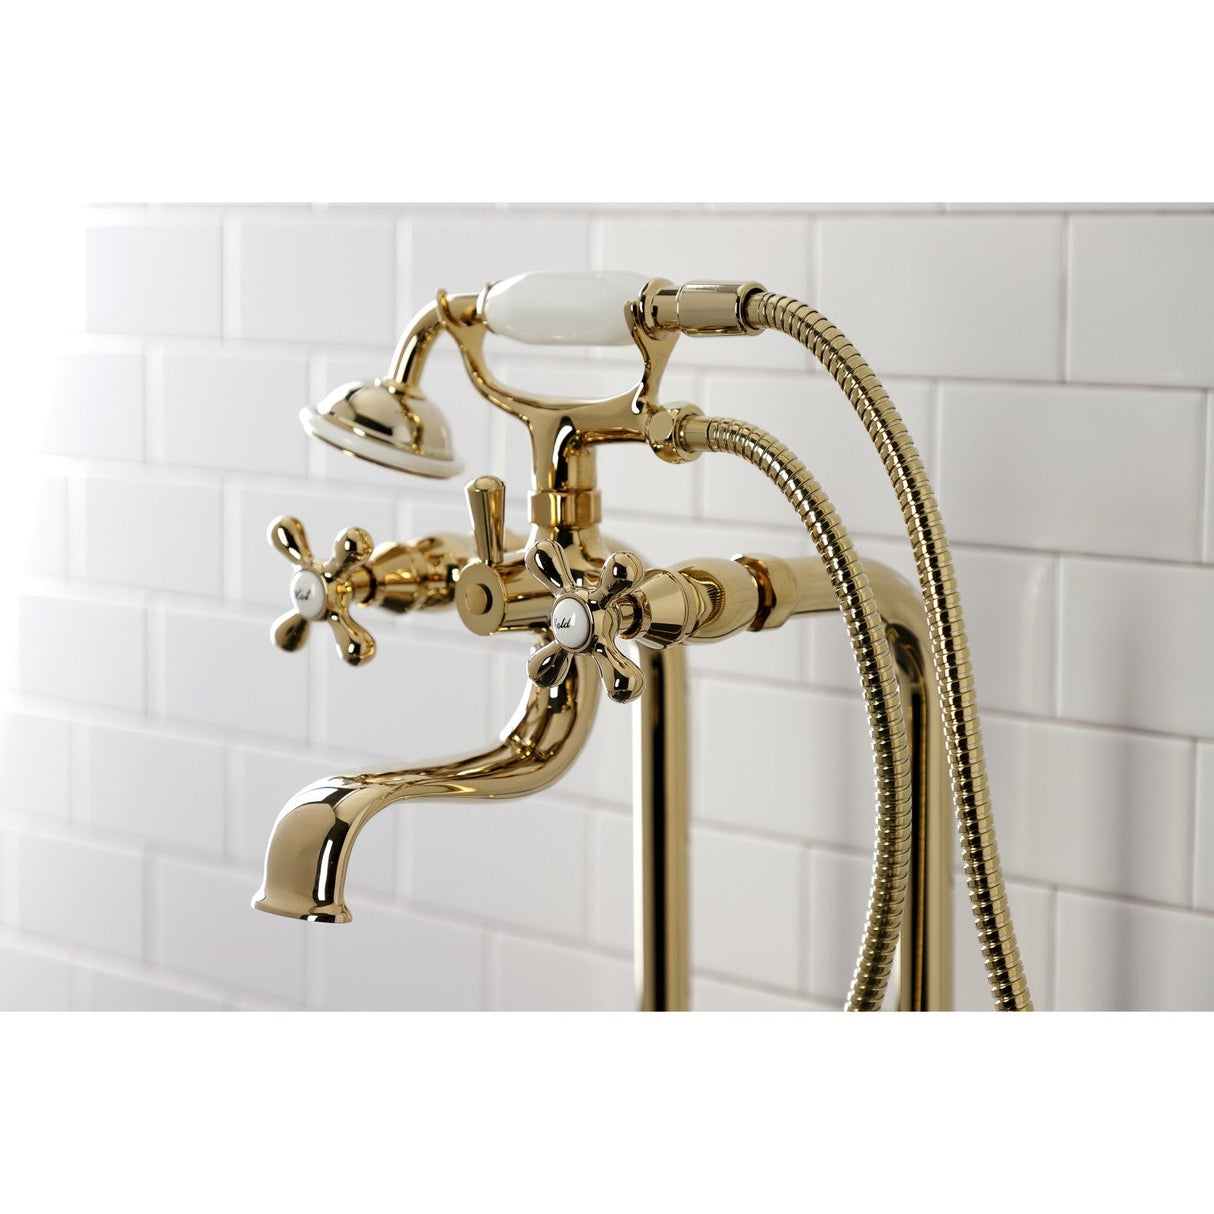 Kingston CCK226K2 Three-Handle 2-Hole Freestanding Clawfoot Tub Faucet Package with Supply Line and Stop Valve, Polished Brass